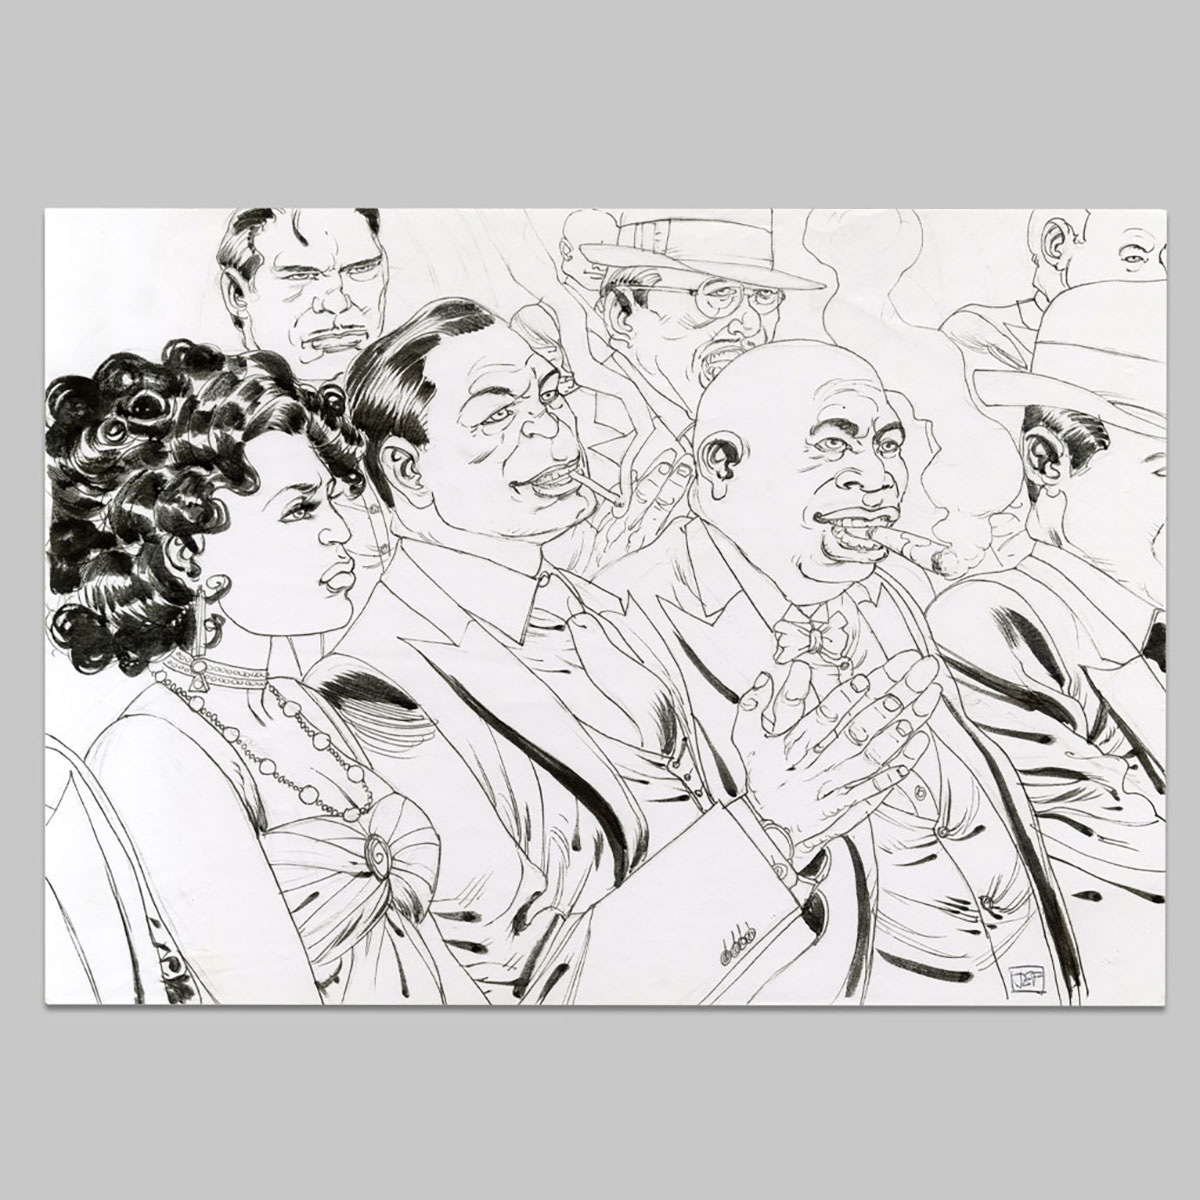 Original drawing Balles perdues, Esler, Lena and Eddie at the boxing match